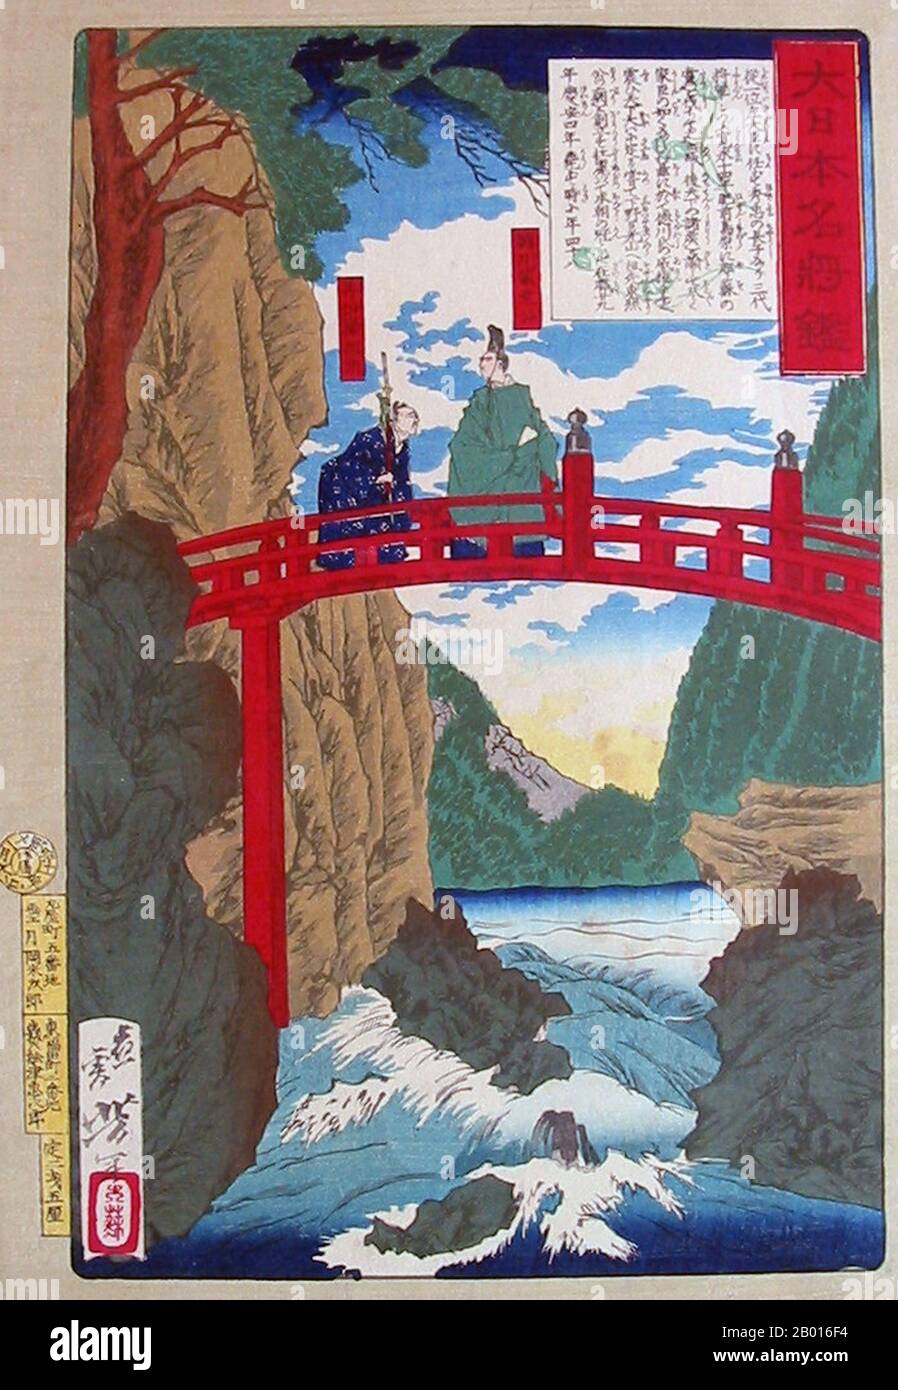 Japan: 'Tokugawa Iemitsu and Ii Naotaka on the Sacred Bridge at Nikko'. Ukiyo-e woodblock print by Tsukioka Yoshitoshi (30 April 1839 - 9 June 1892), 1878.  Tokugawa Iemitsu (12 August 1604 - 8 June 1651), born Takechiyo, was the third shogun of the Tokugawa dynasty and the eldest son of Tokugawa Hidetada. His wet nurse, Lady Kasuga, also served as his political advisor and was central to shogunate negotiations with the Imperial court. His rule was marked by his intense xenophobia, with the borders closed and all Europeans expelled, as well as Christians brutally crucified. Stock Photo